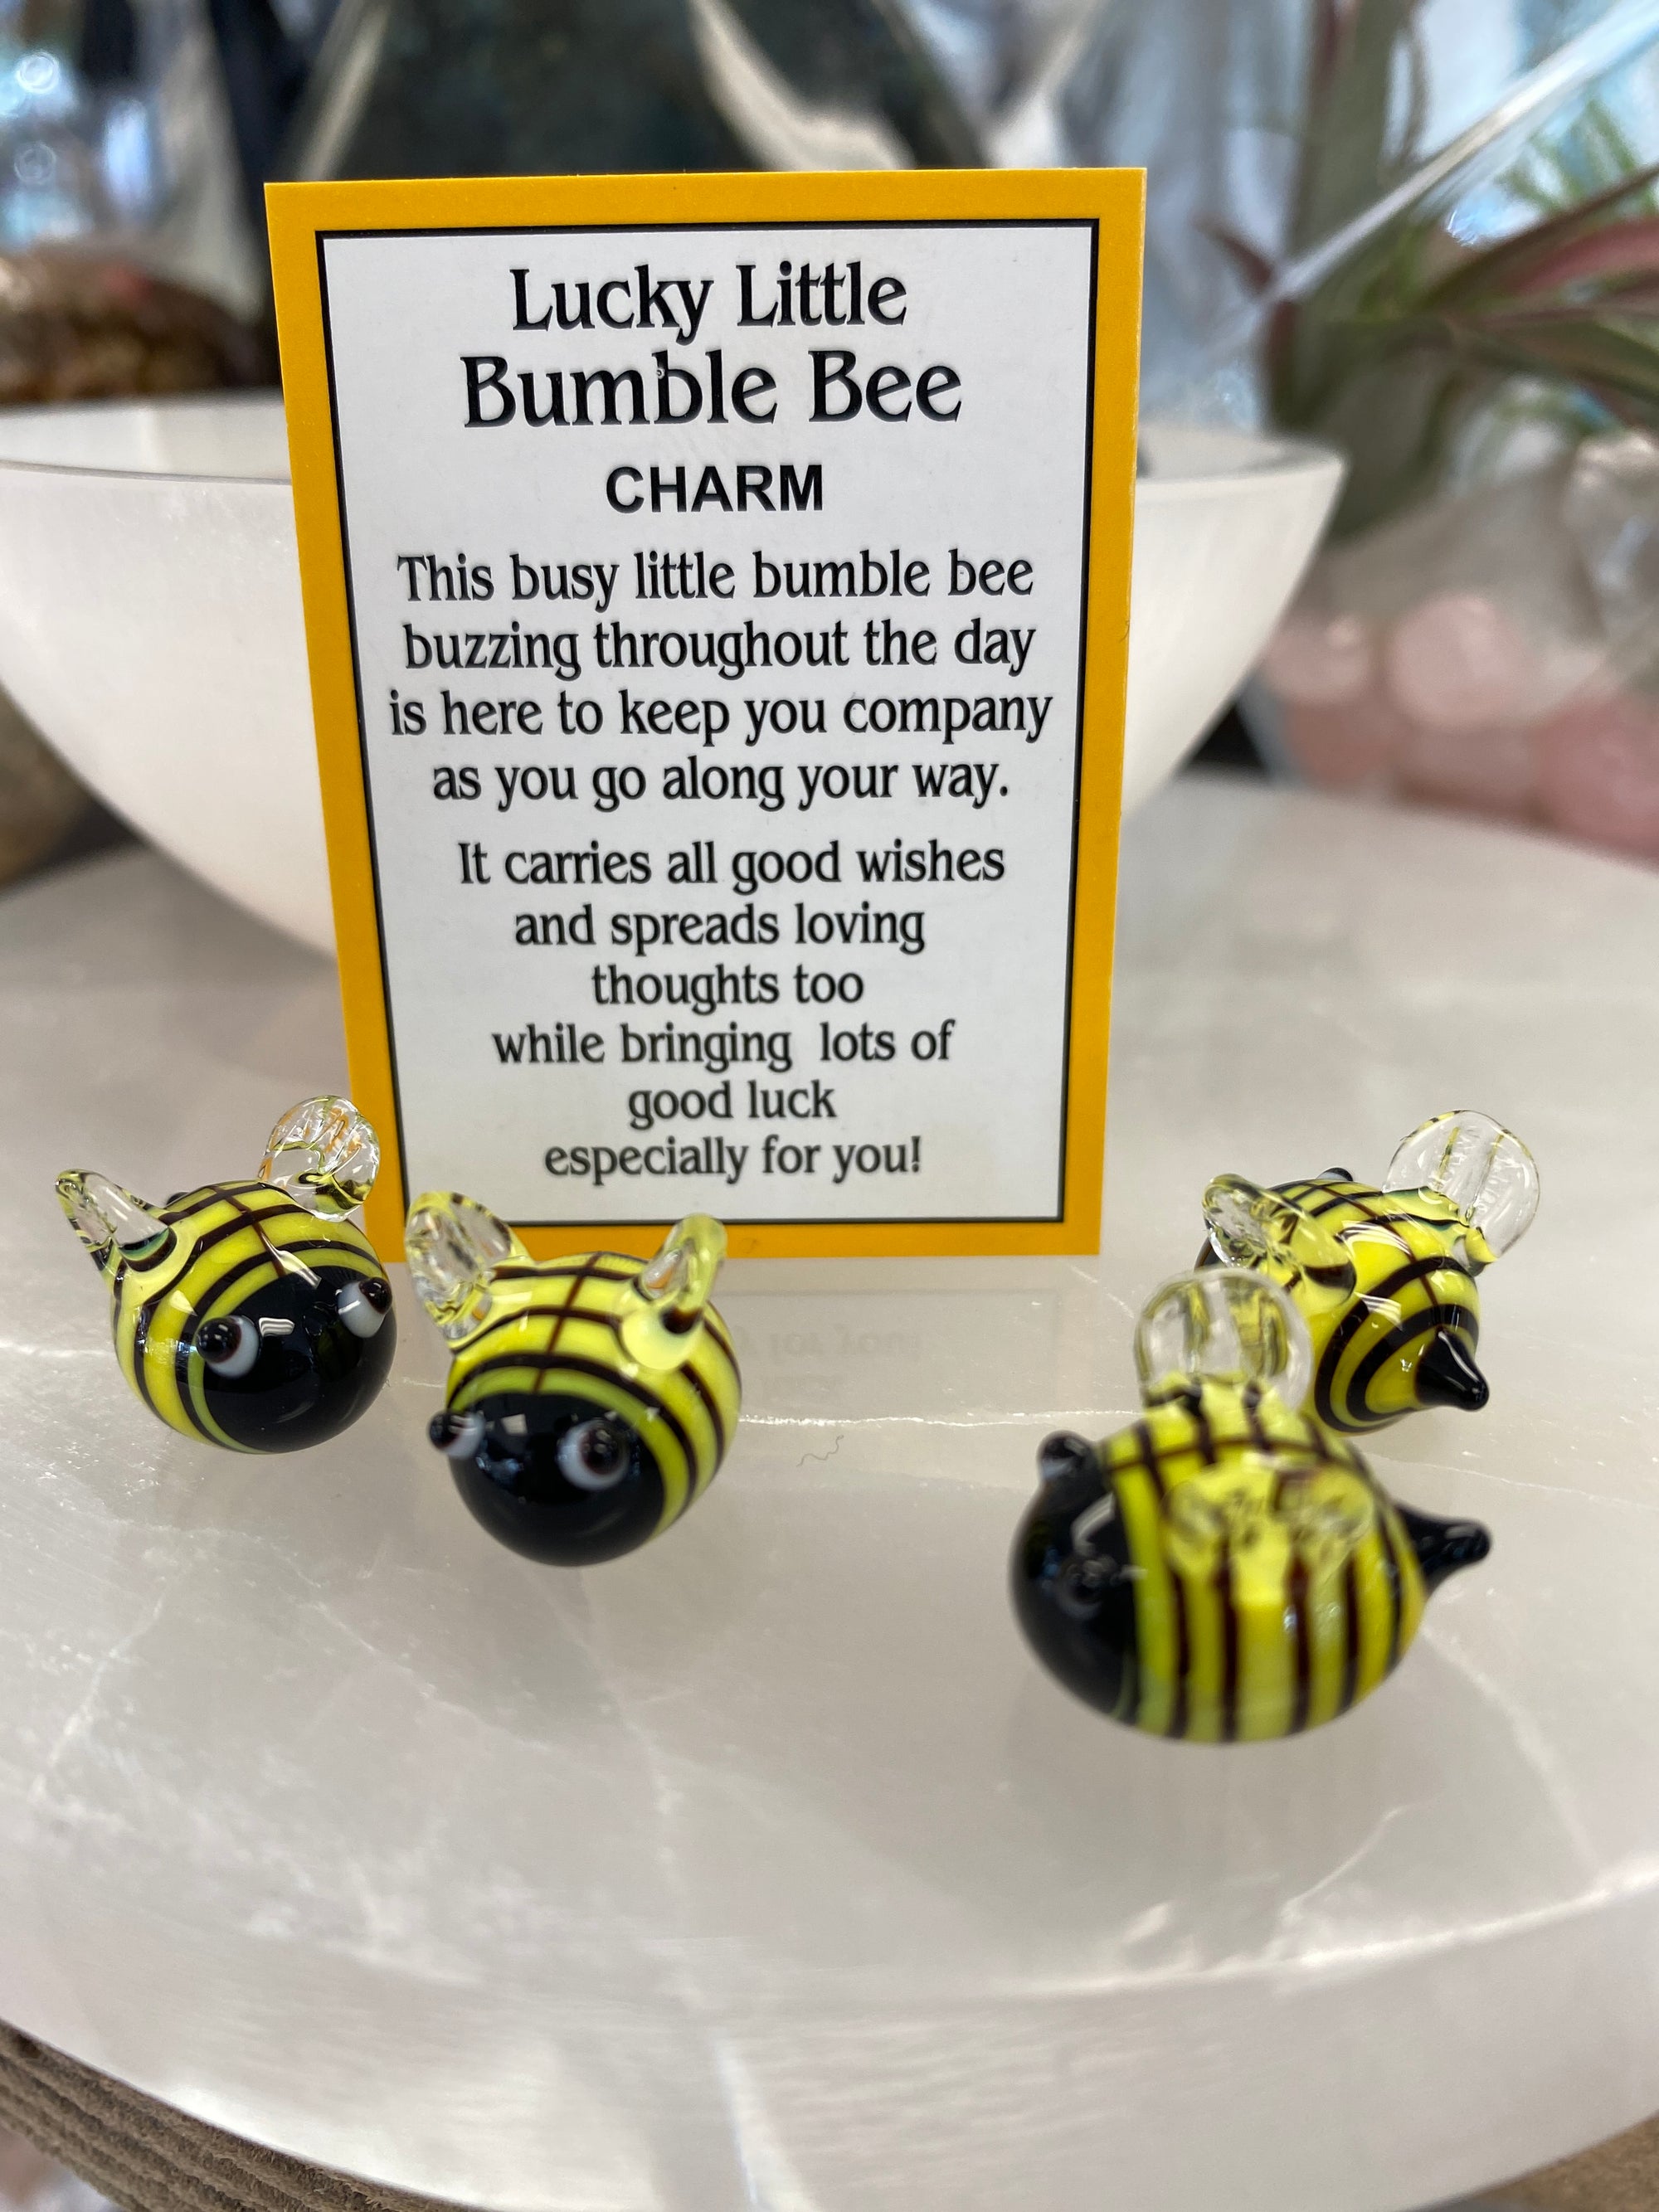 Lucky Little Bumble Bee Charm